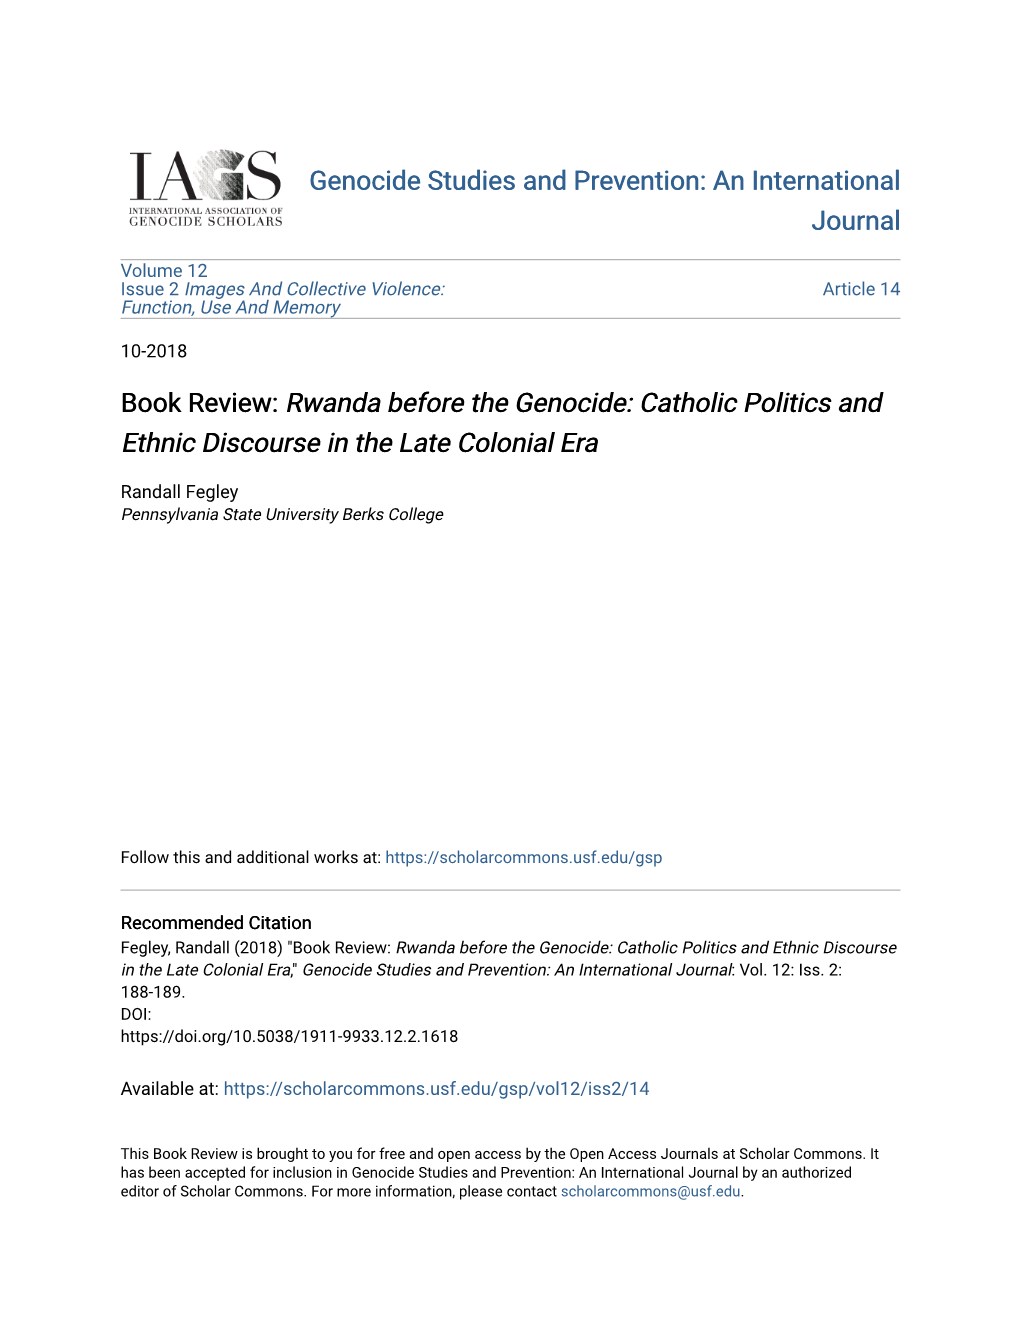 Book Review: Rwanda Before the Genocide: Catholic Politics and Ethnic Discourse in the Late Colonial Era